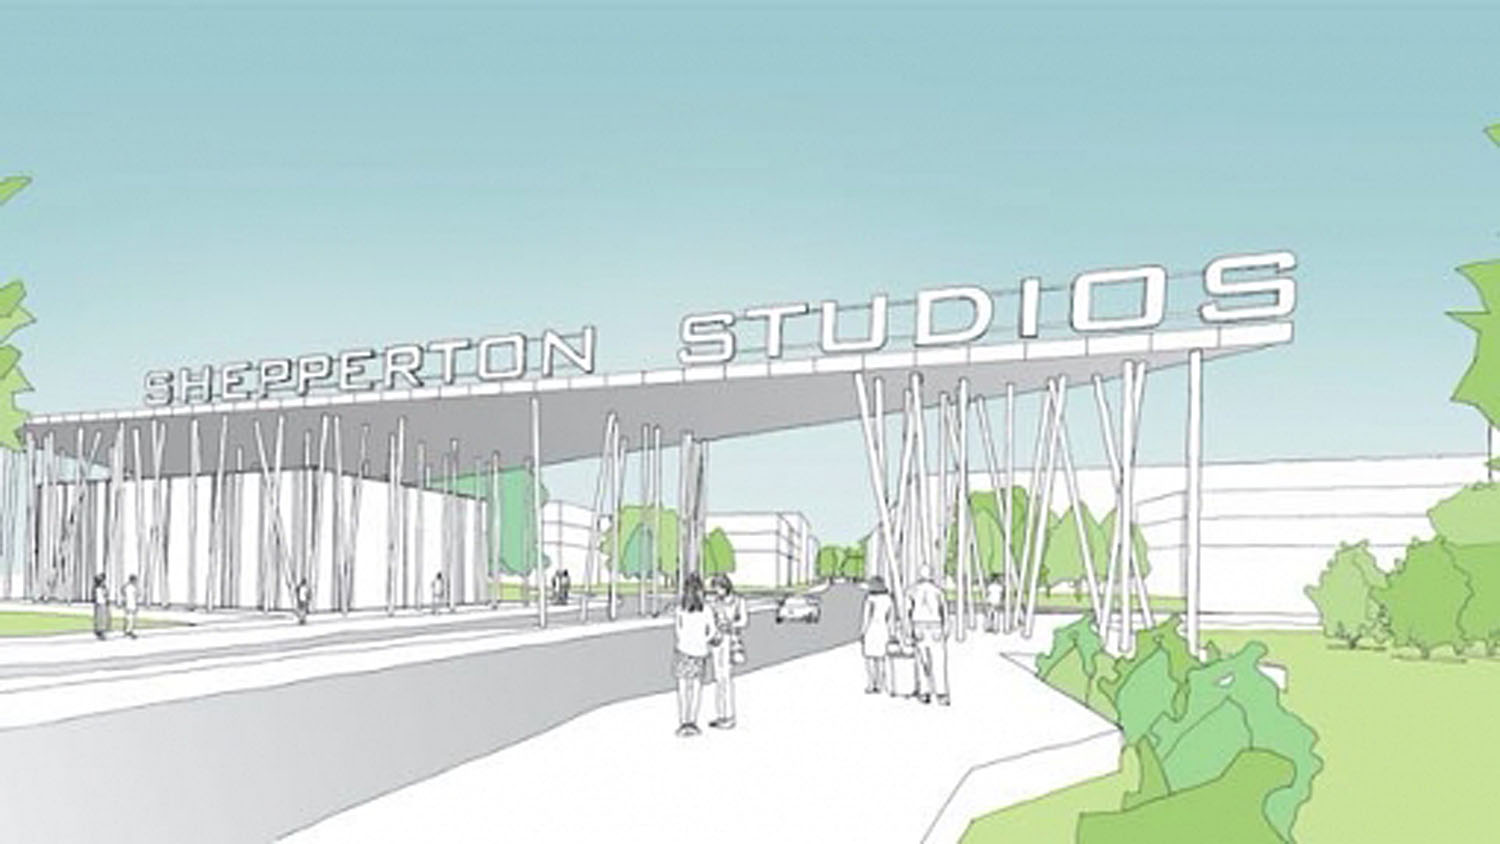 Shepperton Studios given council backing for expansion